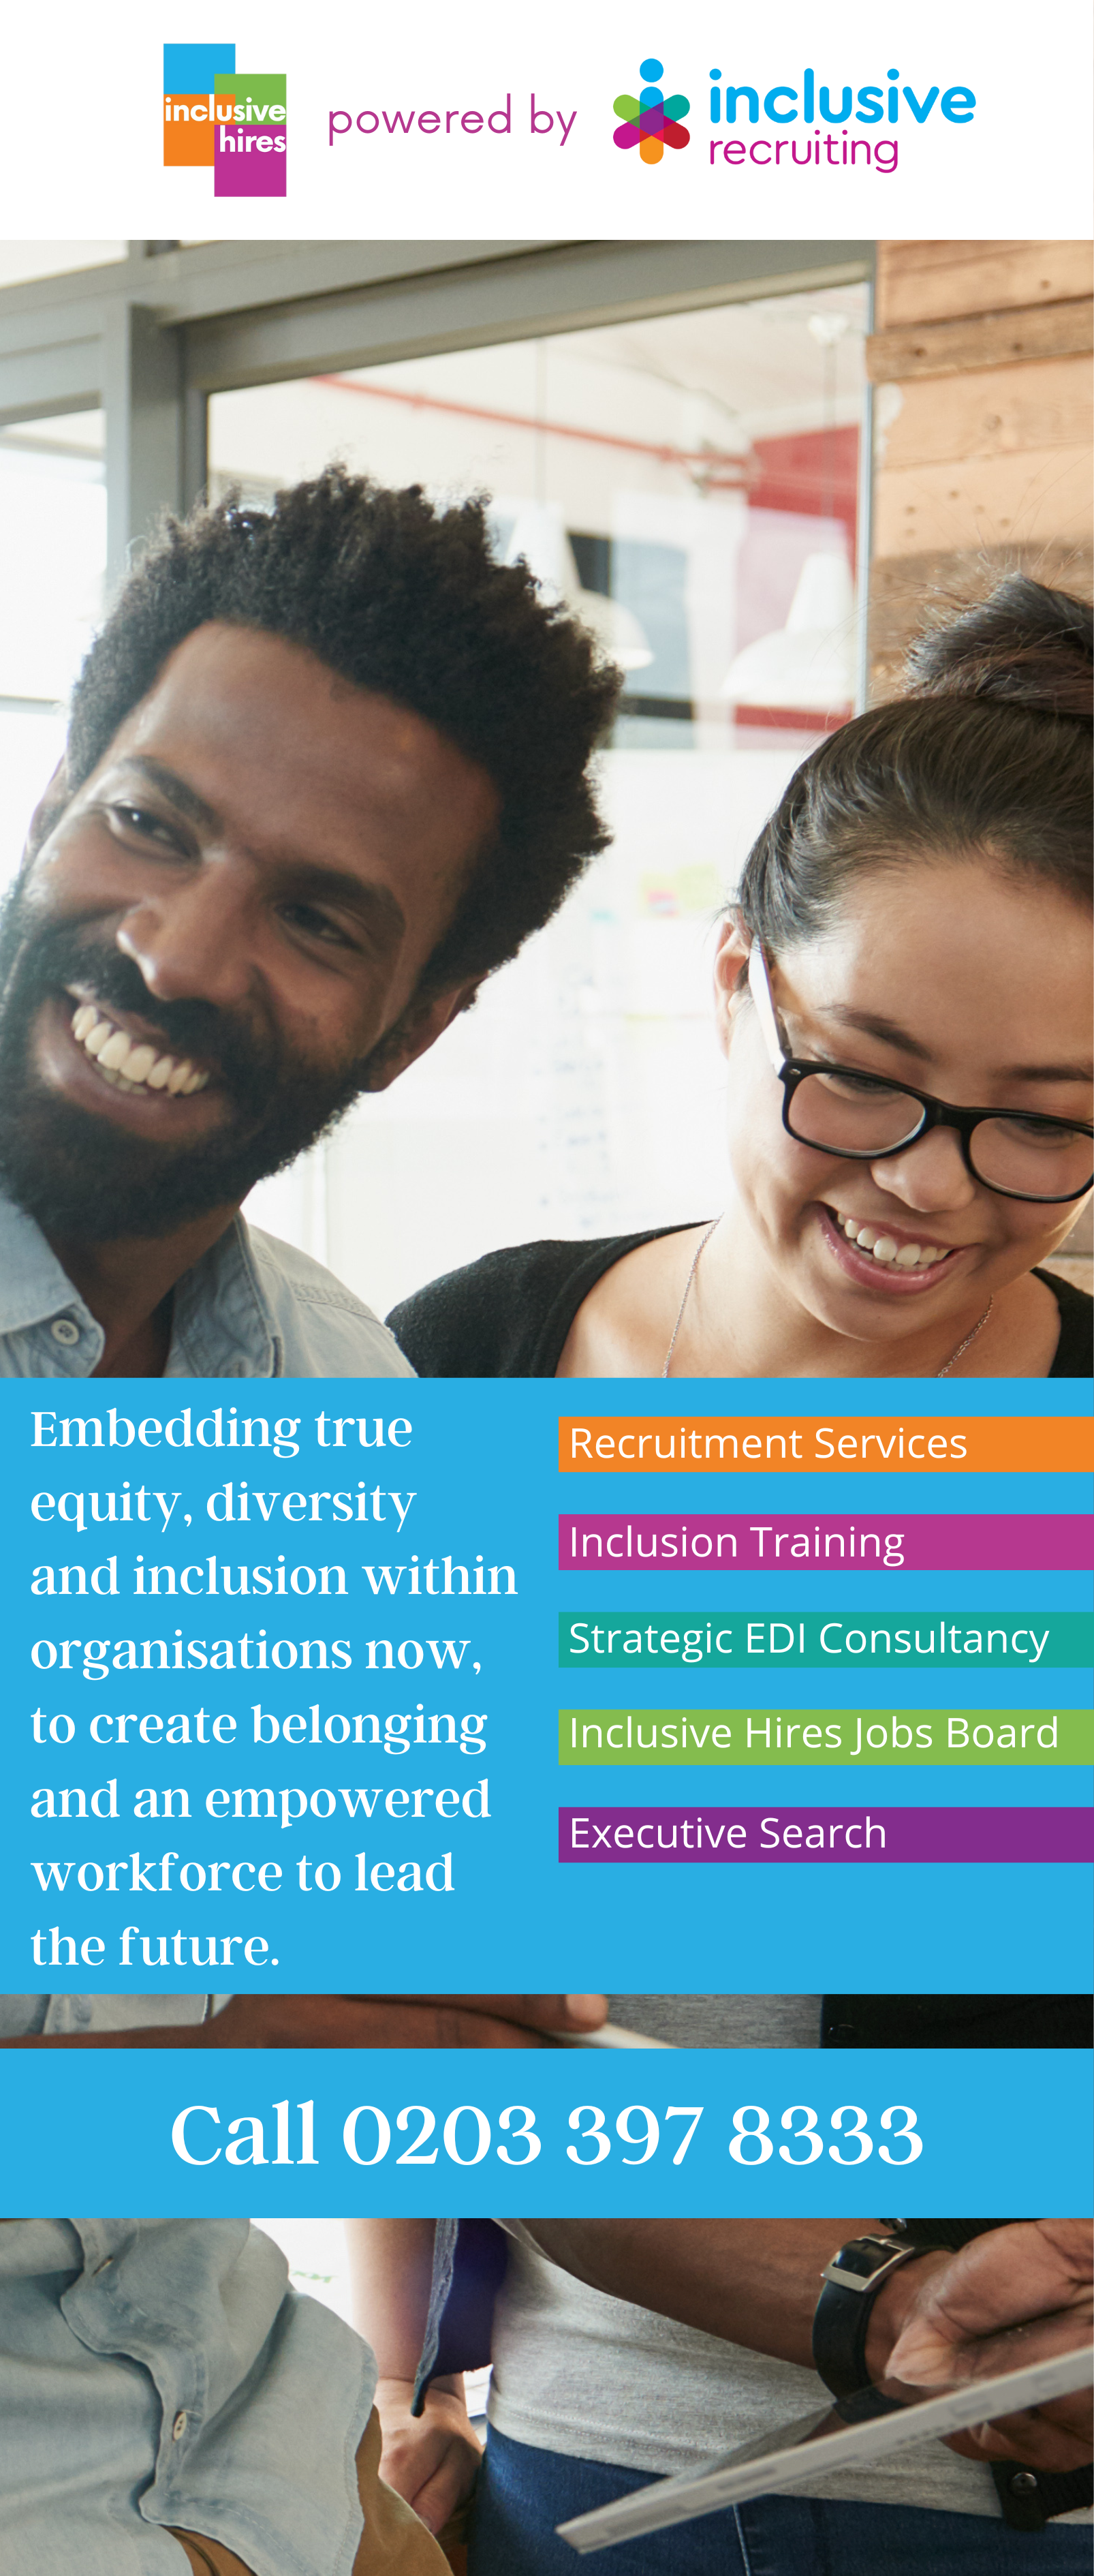 Inclusive Hires powered by Inclusive Recruiting Embedding true equity diversity and inclusion within organisations now to create belonging and an empowered workforce to lead the future Recruitment Services Inclusion Training Strategic EDI Consultancy Inclusive Hires Jobs Board Executive Search Call 0203 397 8333